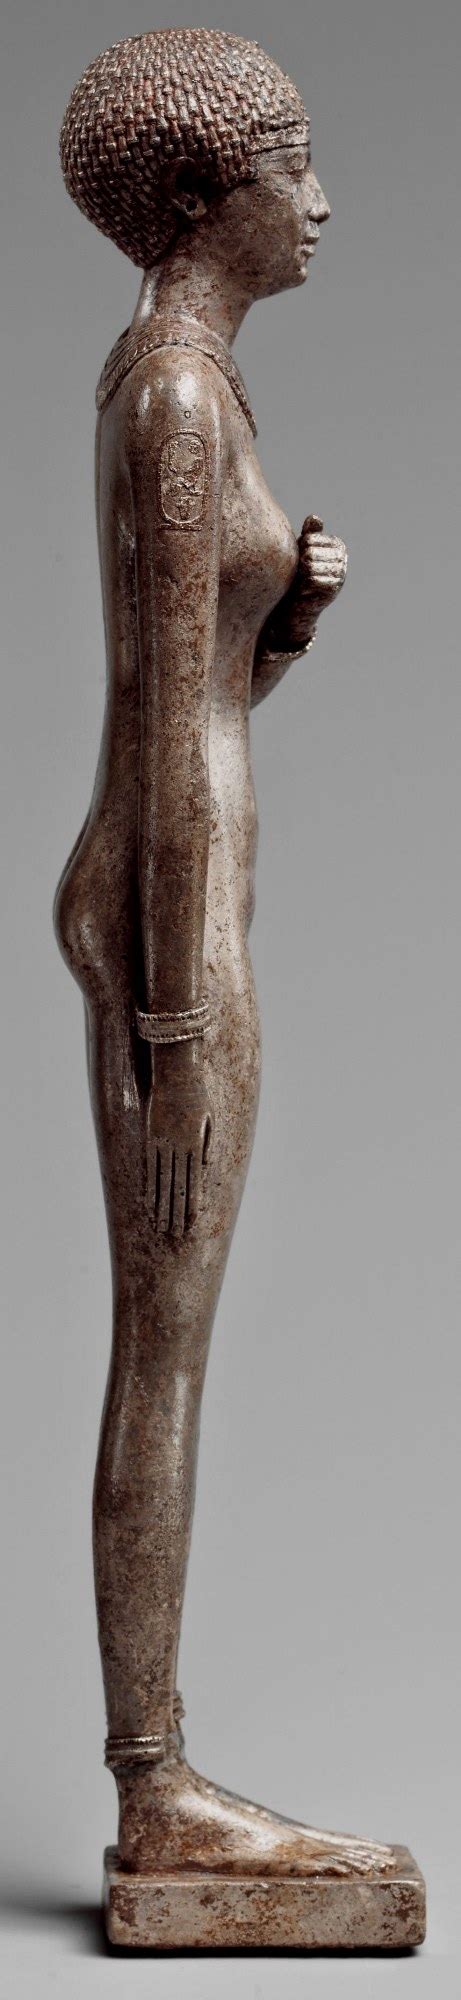 statue of a royal woman with cartouches of necho ii on her arms egypt